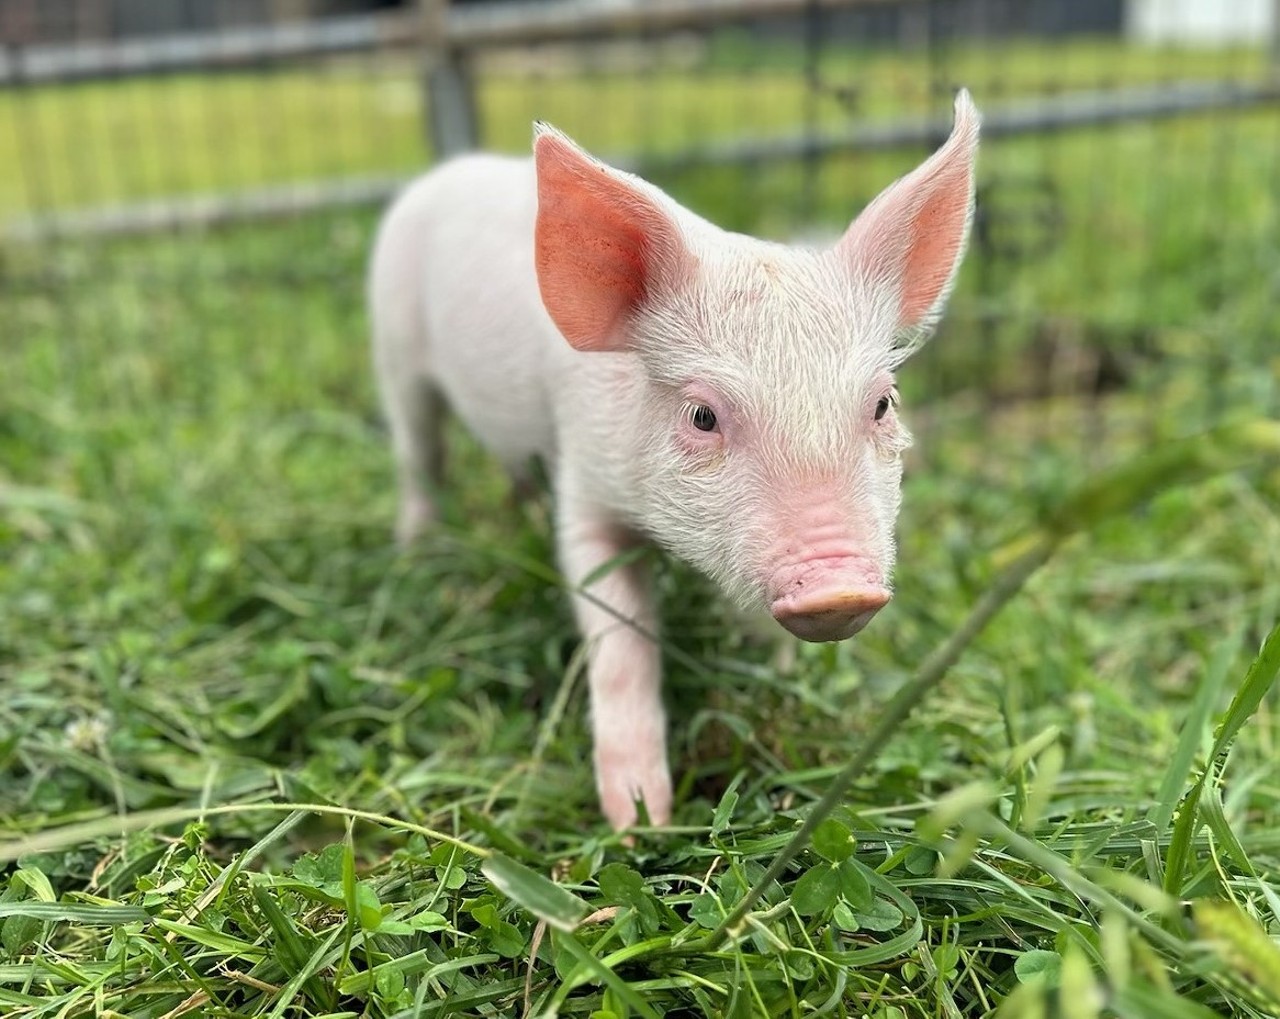 Red Oak Animal Rescue Fall Farm Festival
When: Sept. 30 from 1-4 p.m.
Where: Red Oak Animal Rescue, New Richmond
What: Festival featuring farm animals, food, art, music and more.
Who: Red Oak Animal Rescue
Why: Visit with any one of the farm's more than 200 animals (or all of them).